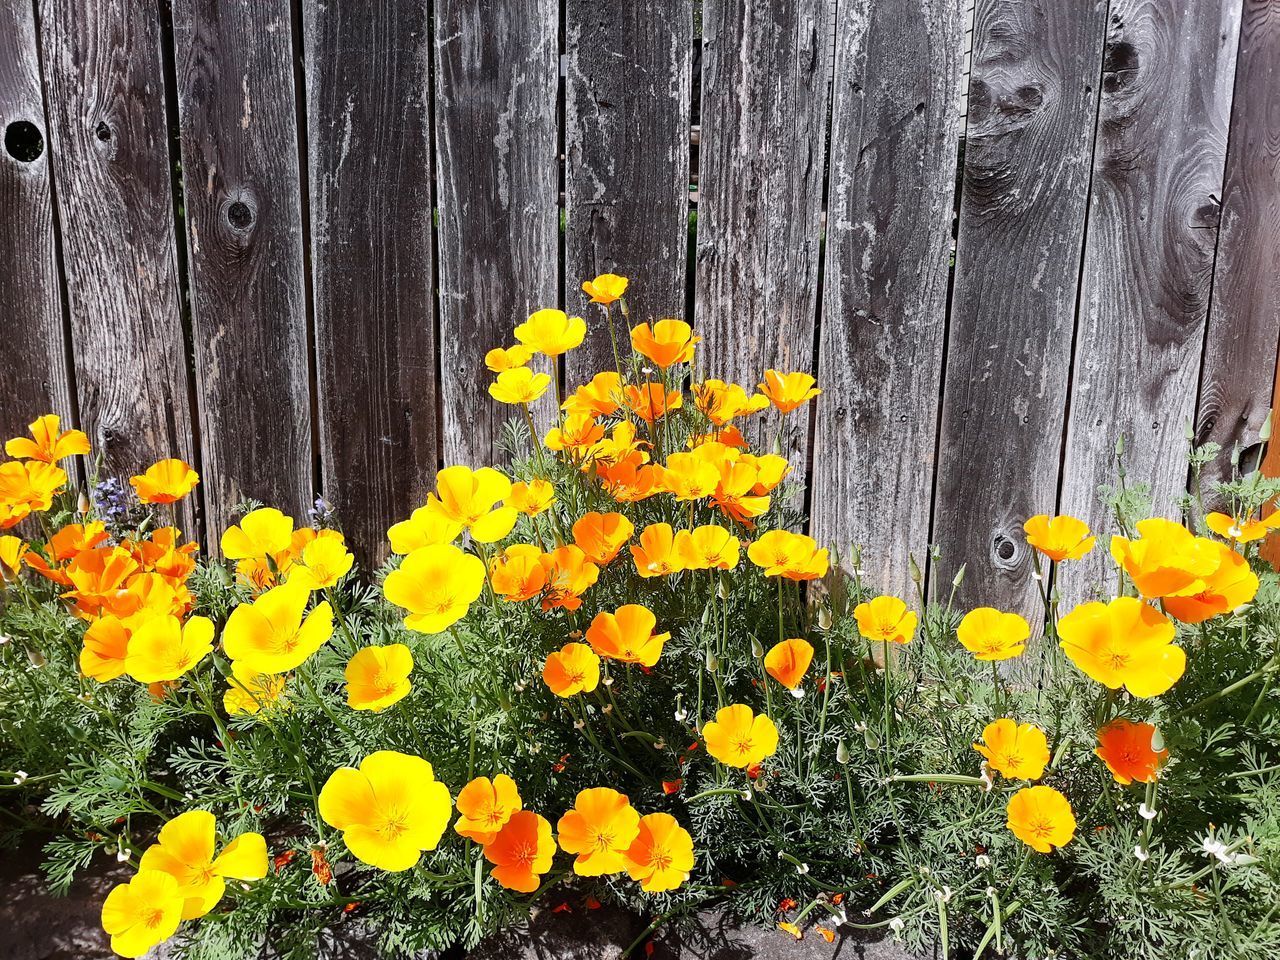 YELLOW FLOWERS ON WOODEN FENCE